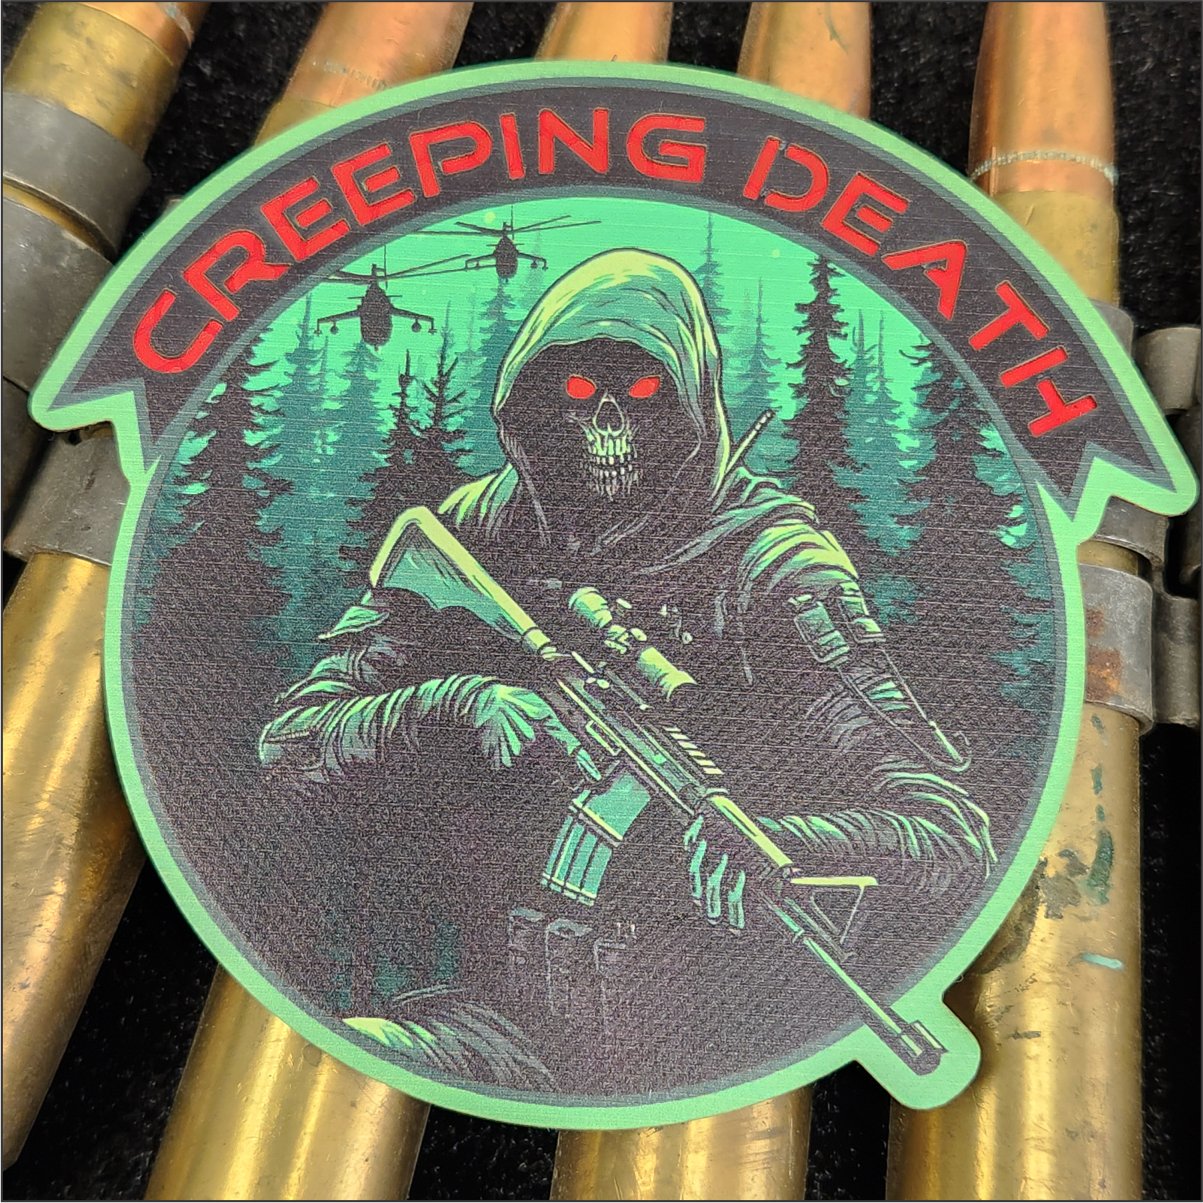 VIP MEMBERS ONLY COLOR Creeping Death Reflective Laser Cut Printed Patch - #3 in the Metal up your ass Collection